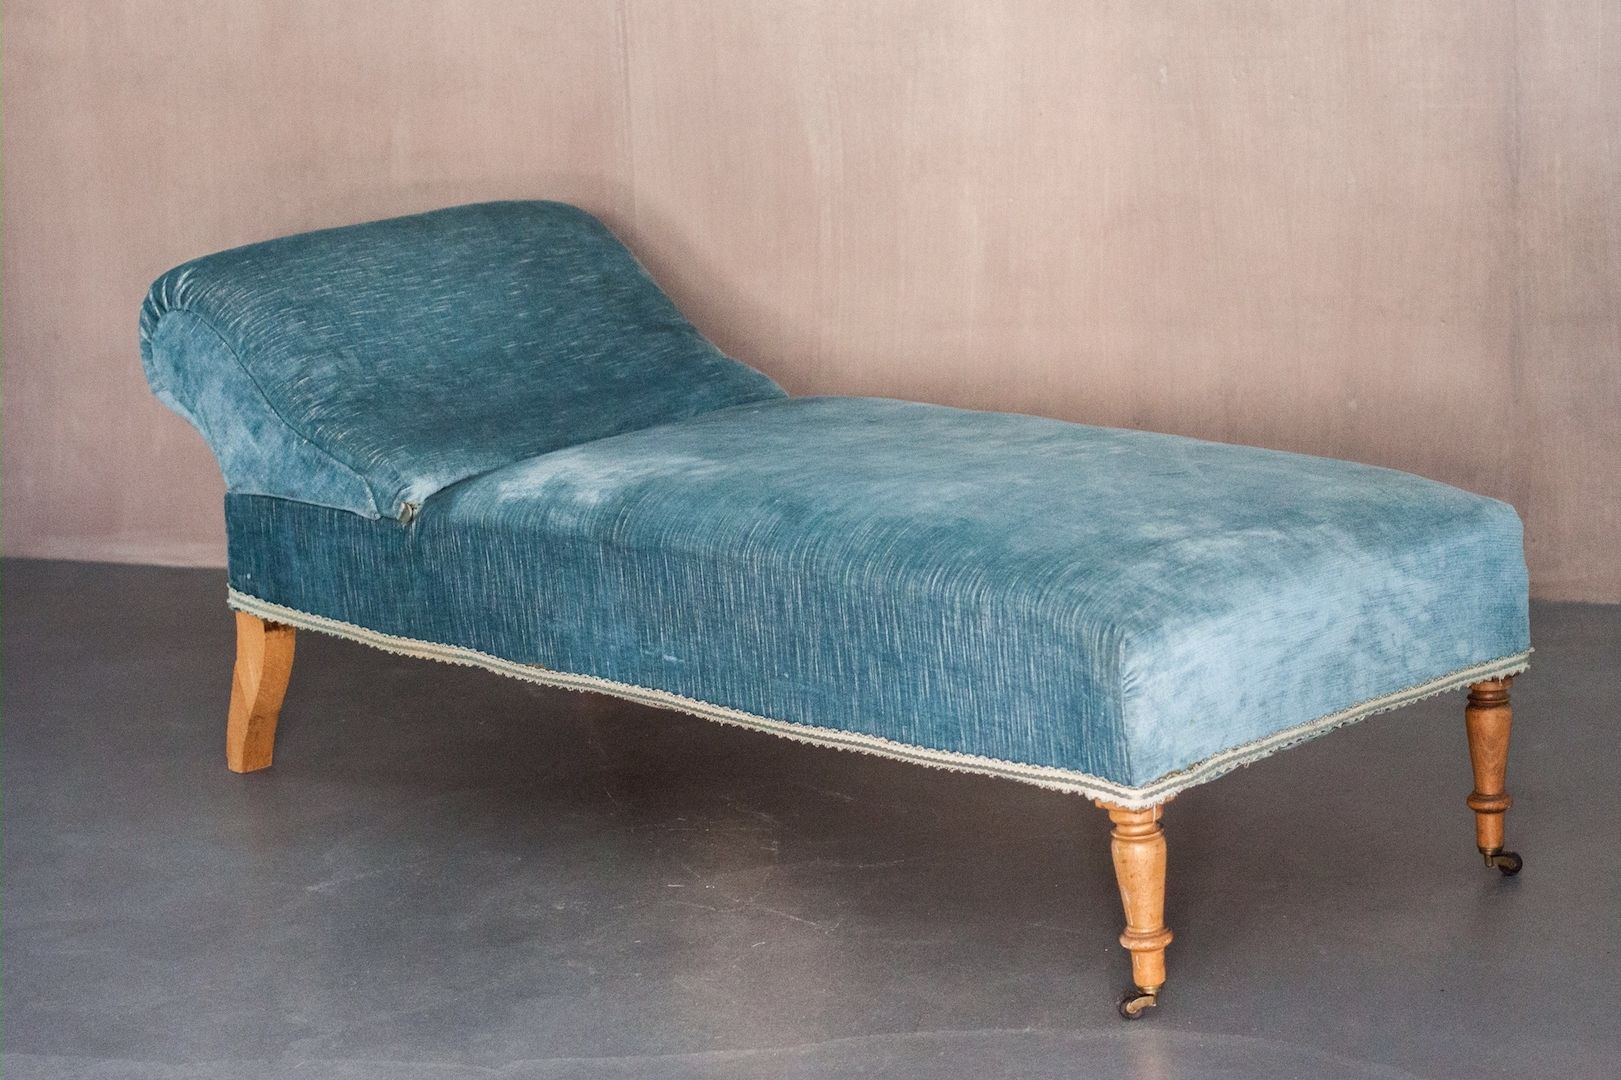 2018 Upholstered Chaise Lounges Throughout Vintage Chaise Lounge With Sky Blue Velvet Upholstery For Sale At (View 8 of 15)